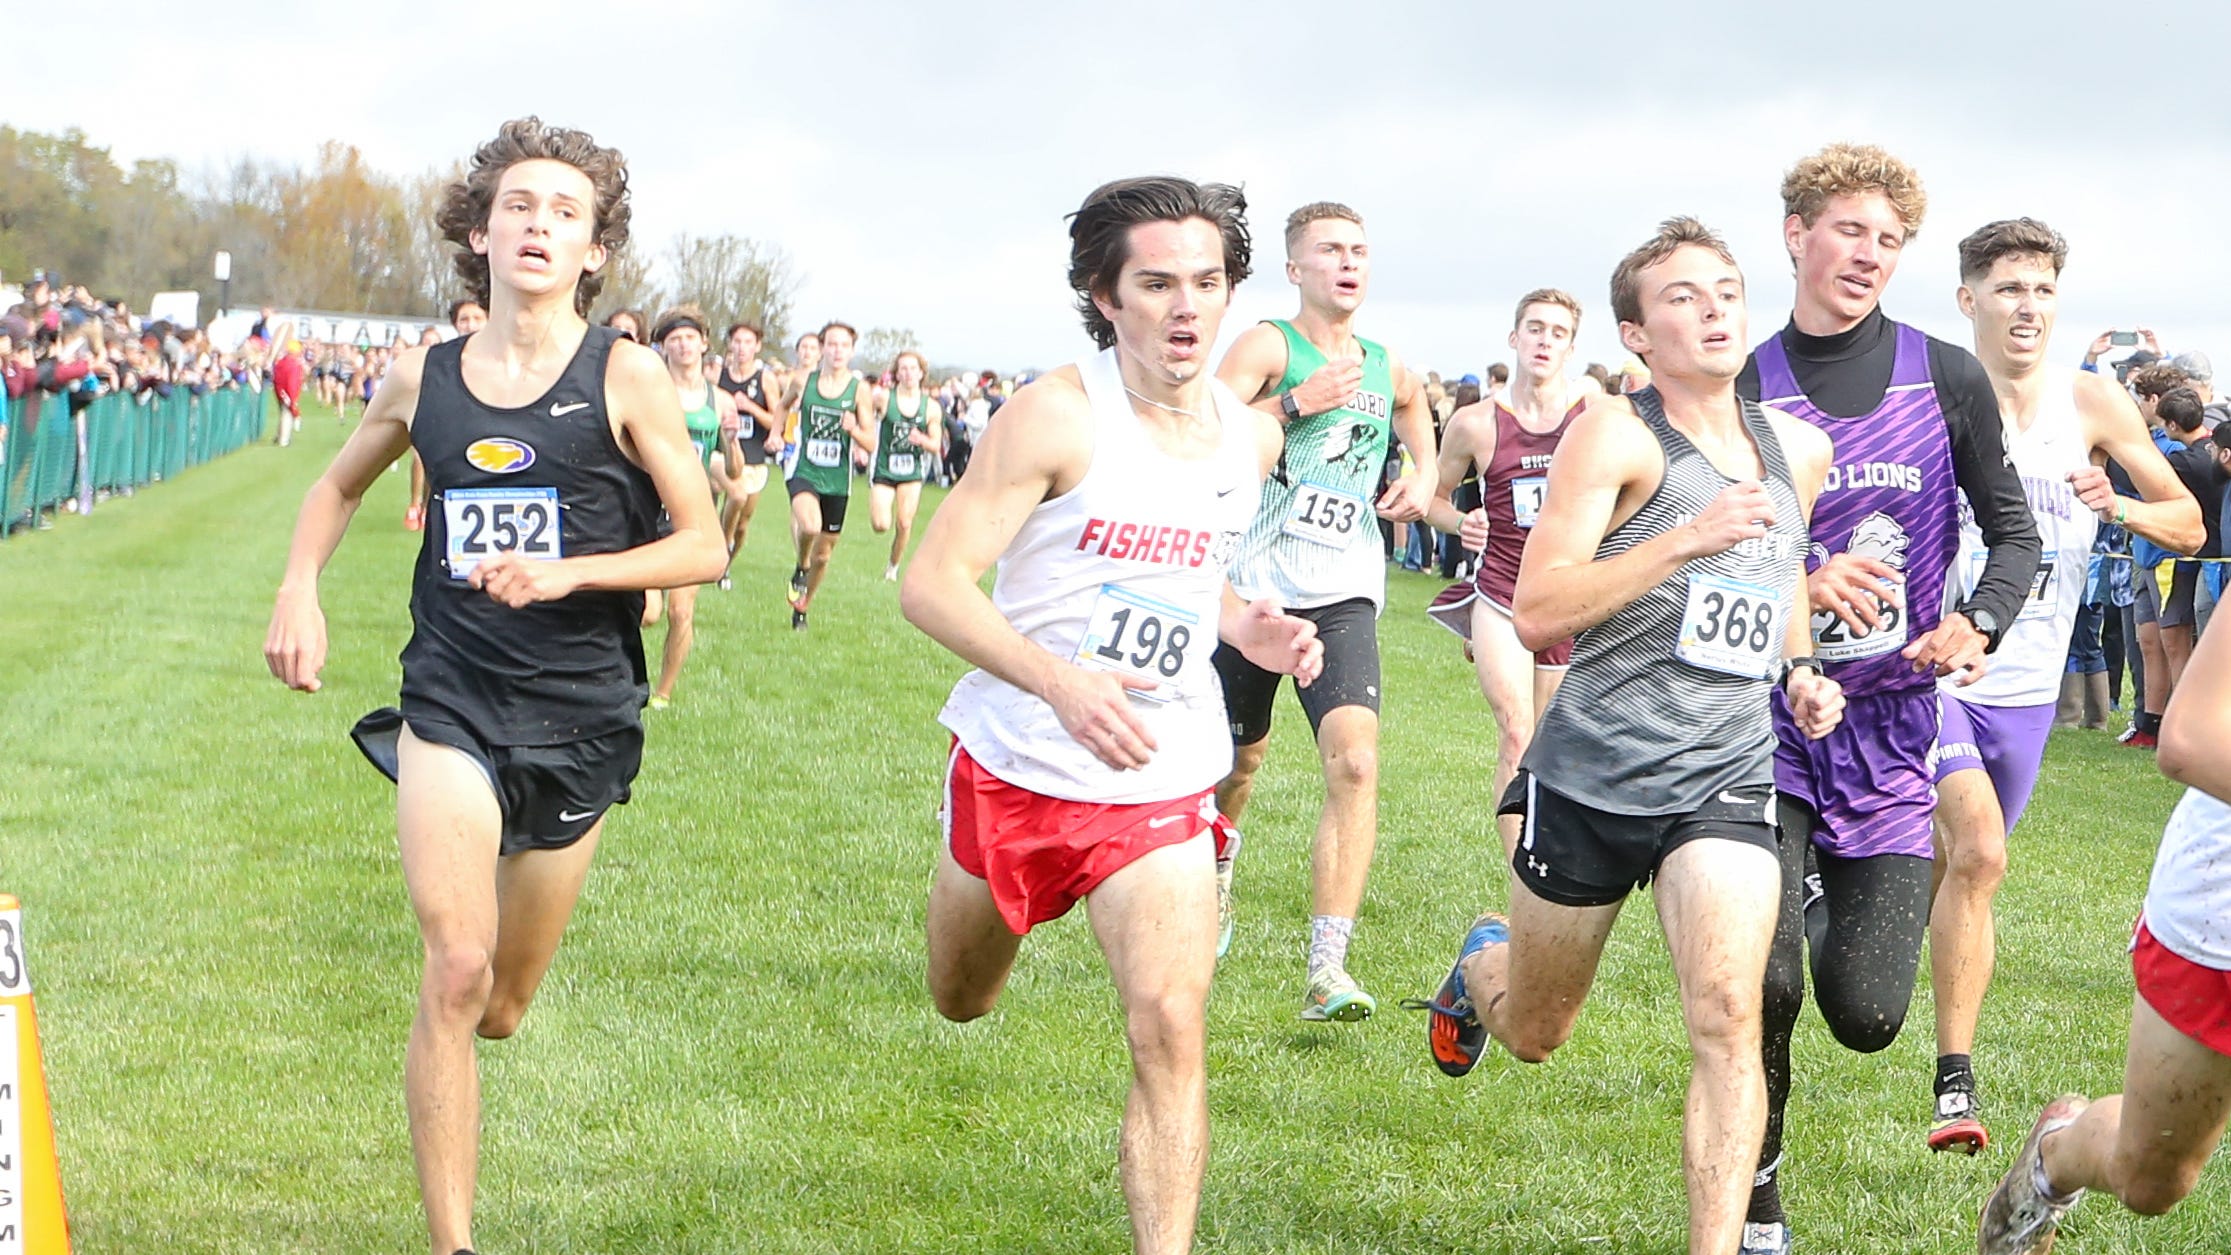 IHSAA boys cross country state championship results in Terre Haute